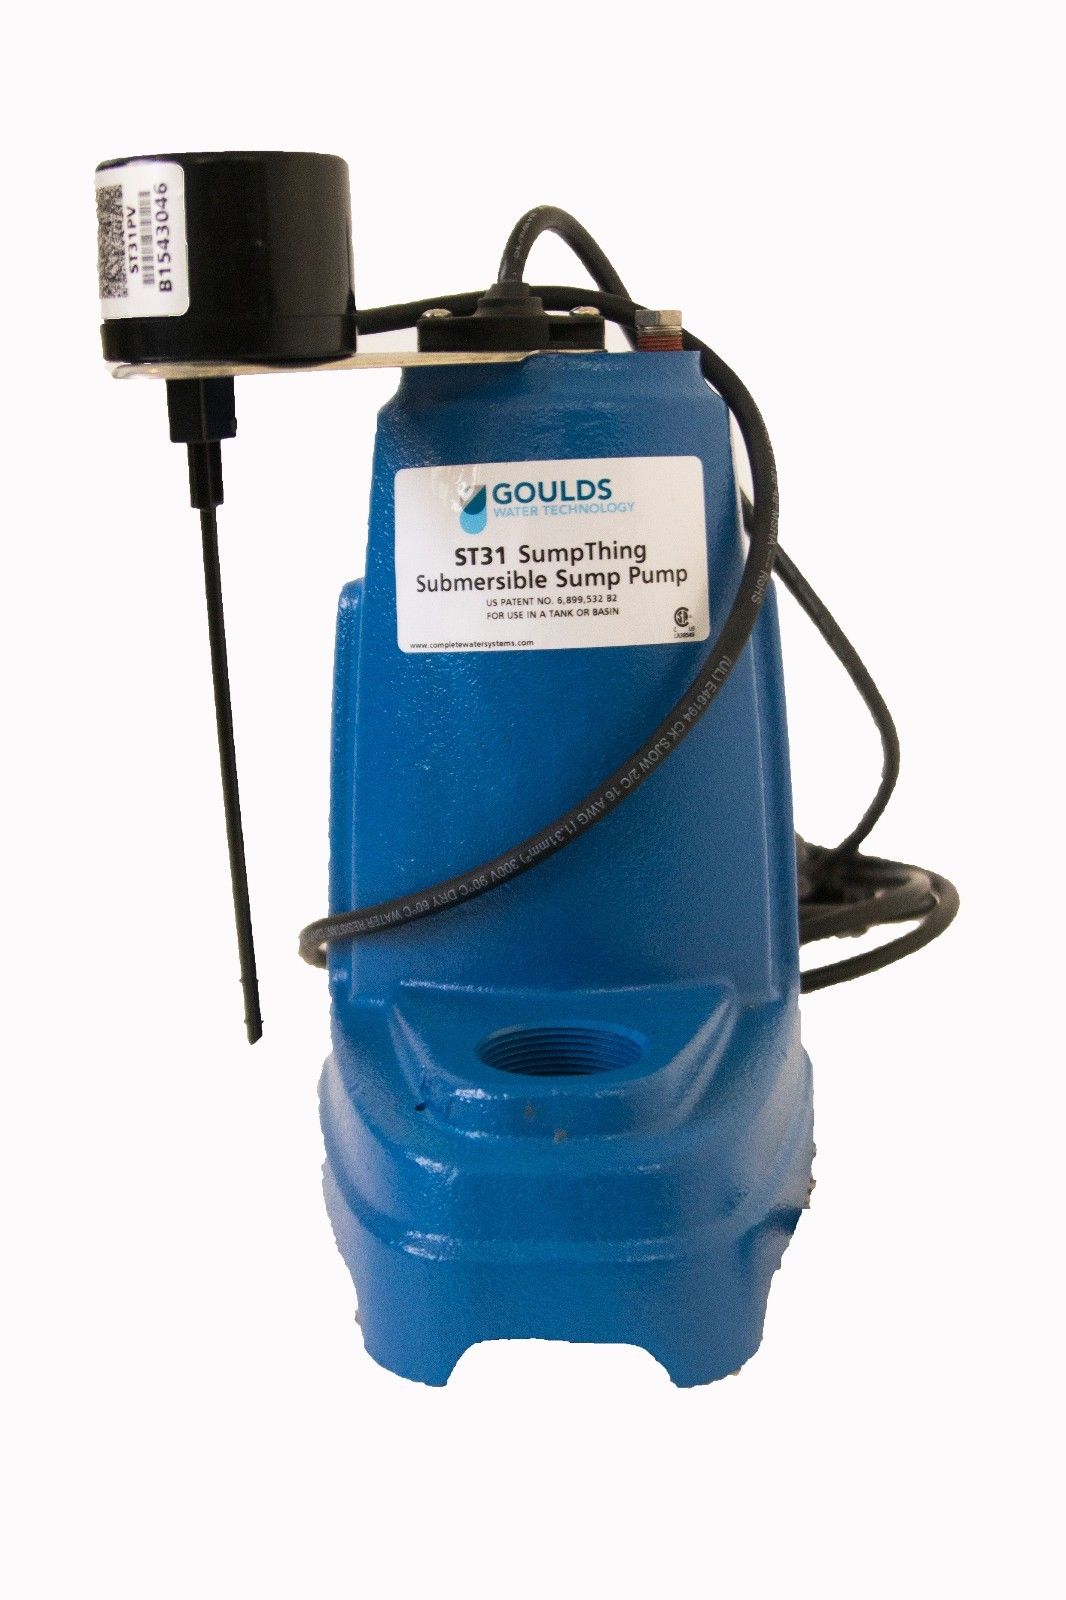 Goulds ST31PV Submersible Sump Pump 1/3HP 115V "Sump Thing"